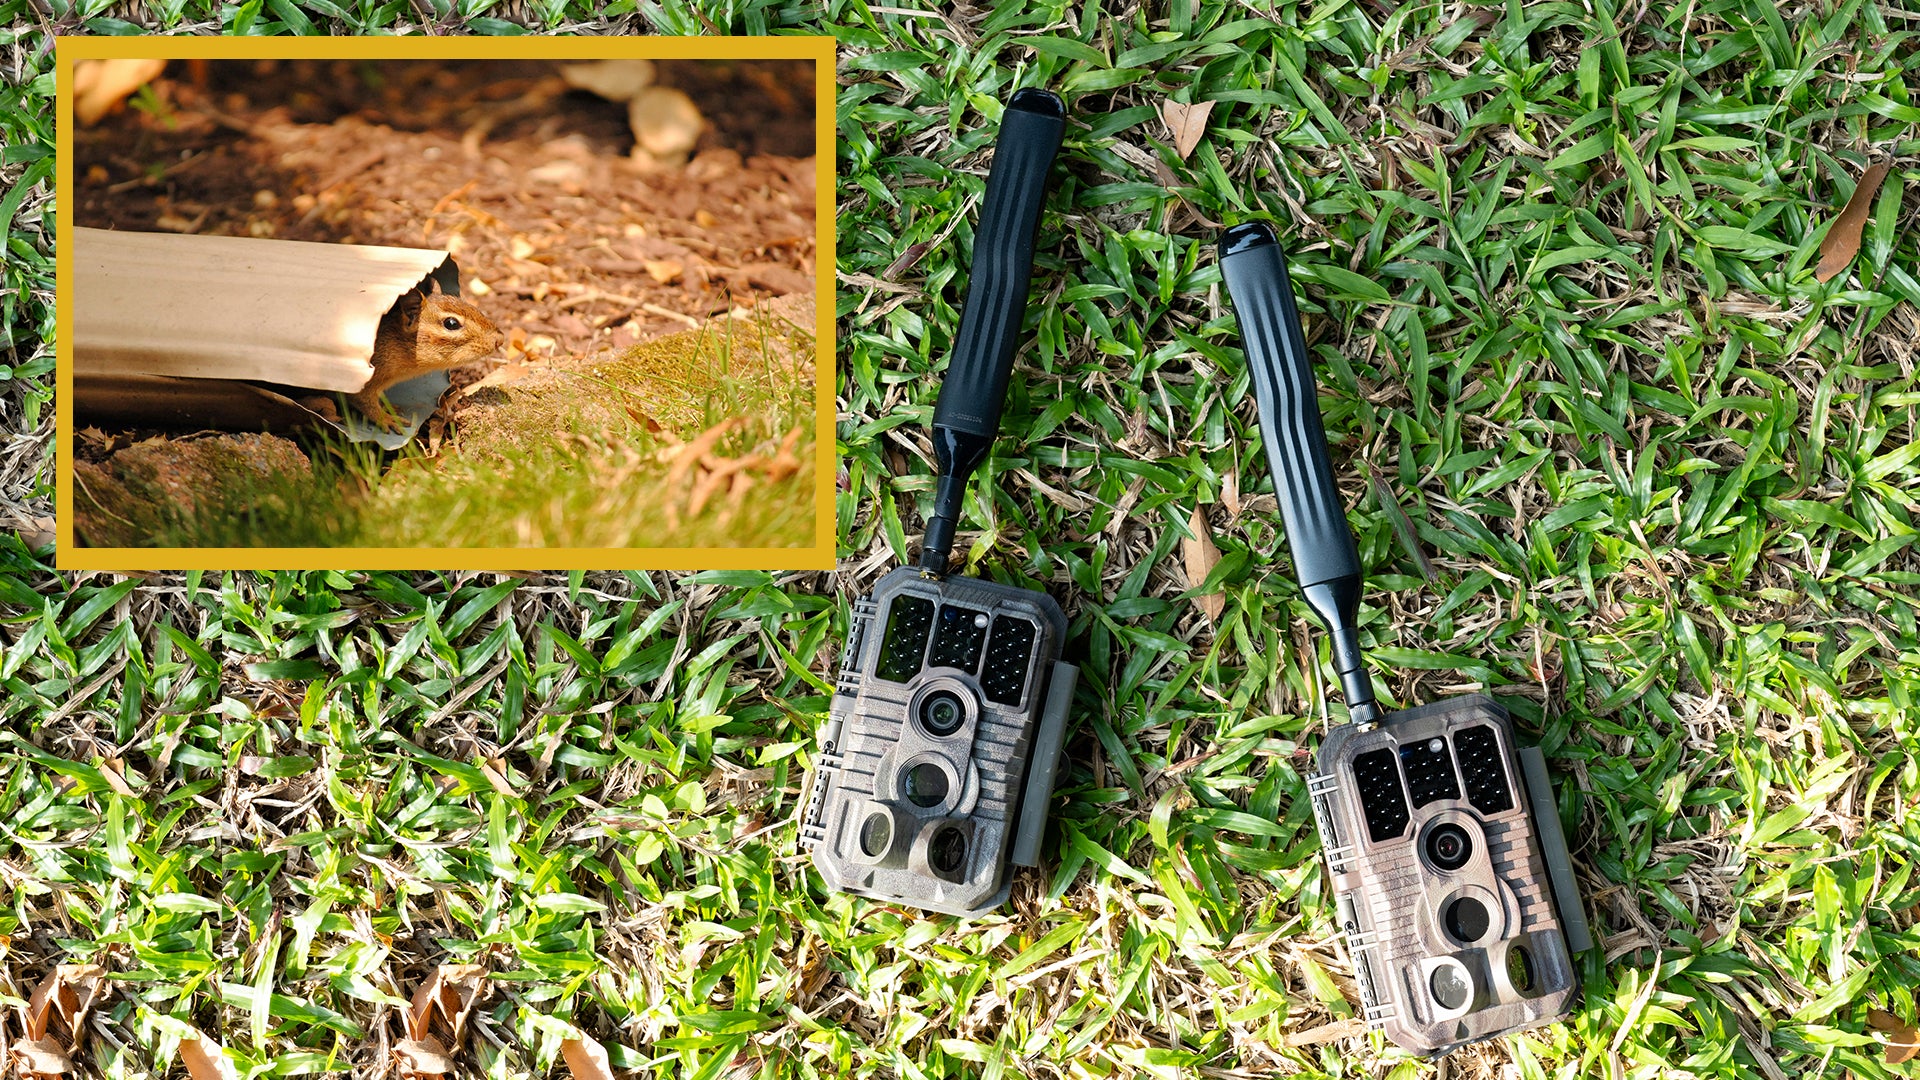 Score Big Savings: Top 3 GardePro Trail Camera Deals You Can't Miss!